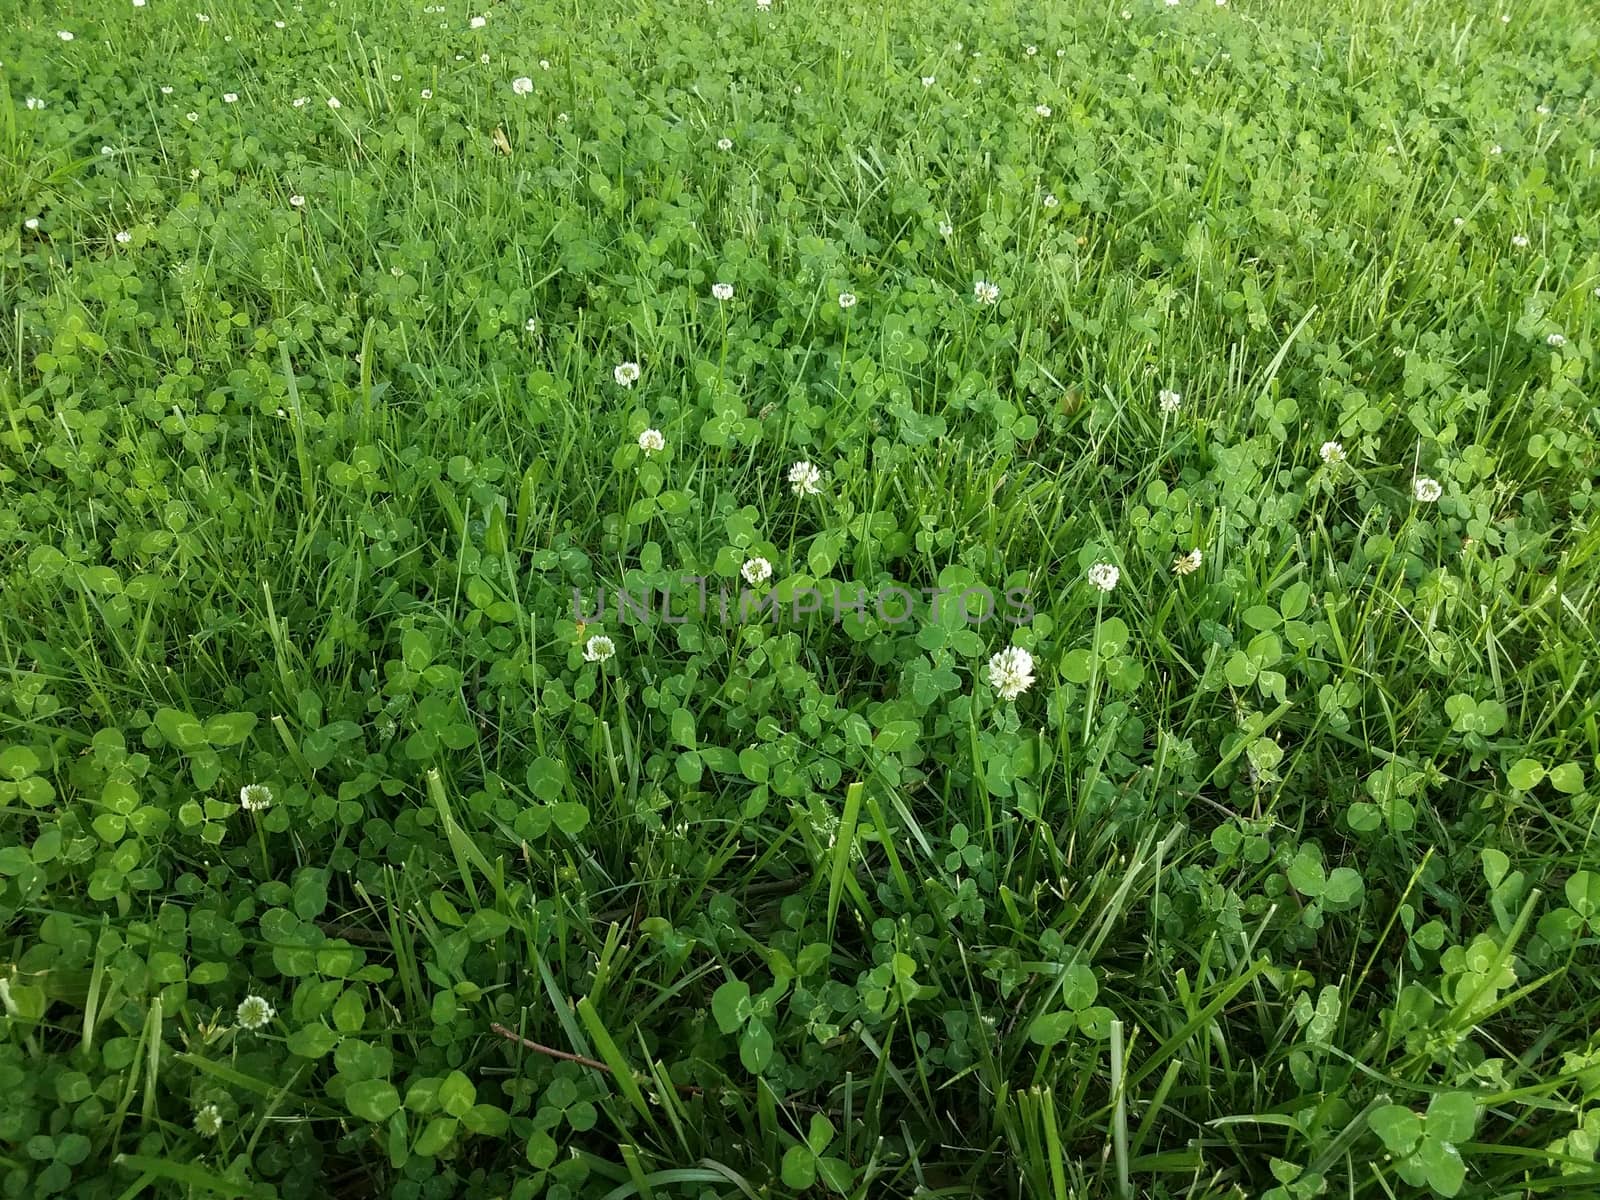 clover weeds and green grass in the lawn by stockphotofan1